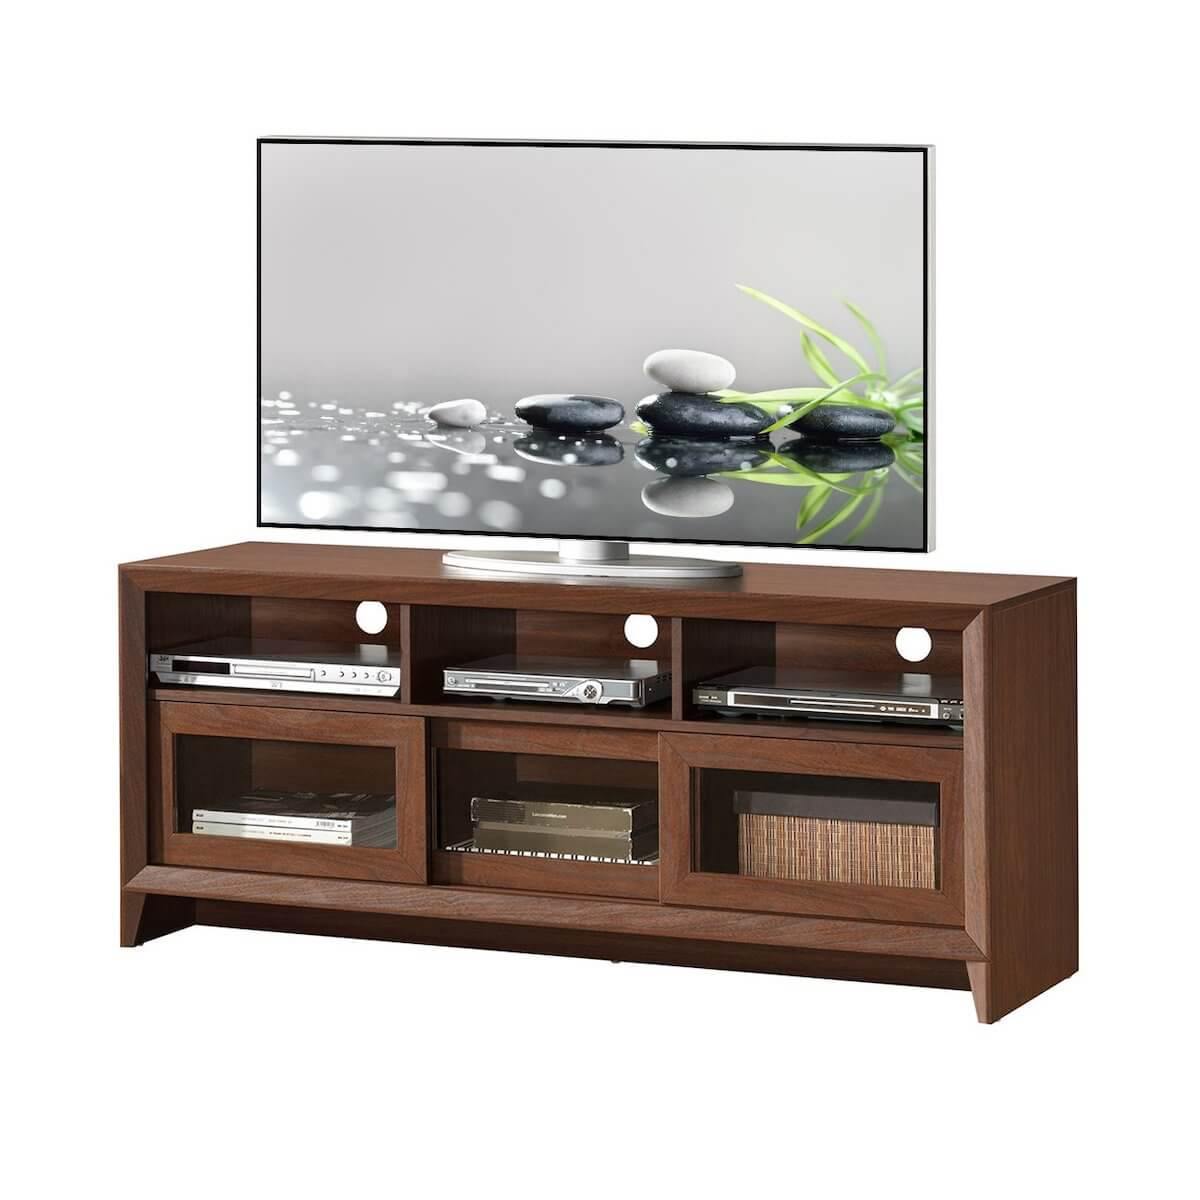 Techni Mobili Hickory Modern TV Stand with Storage for TVs Up To 60" RTA-8811-HRY with TV